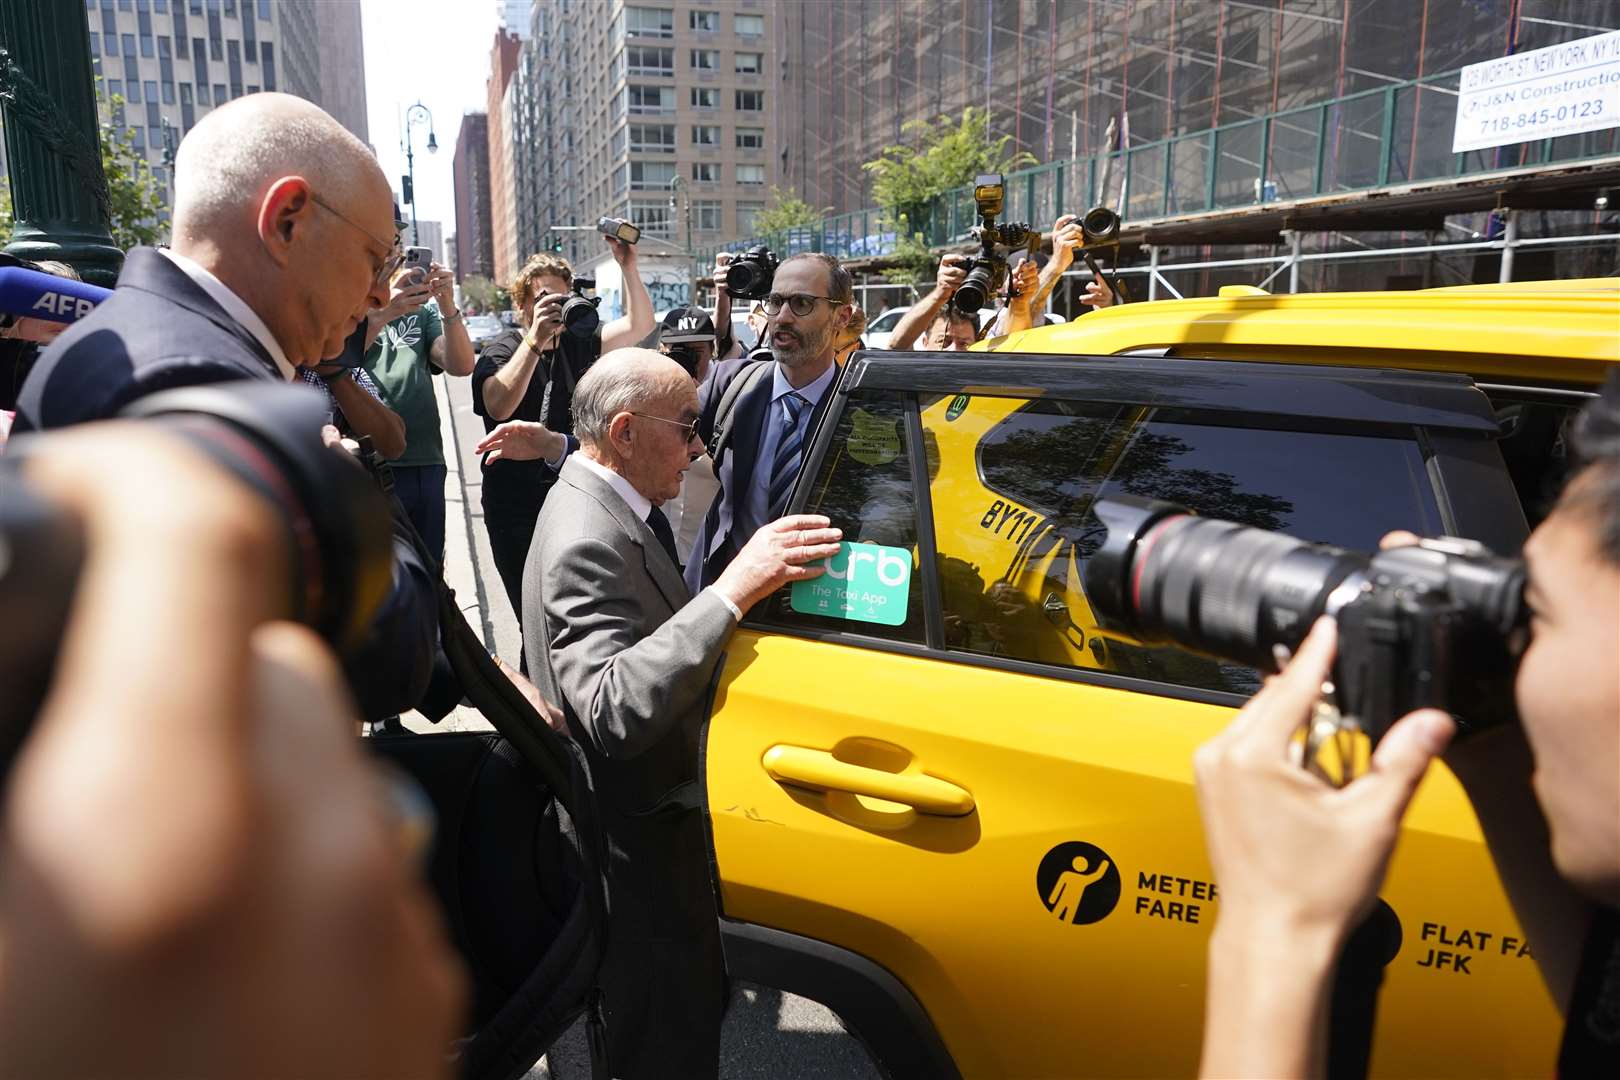 Tavistock founder Joe Lewis, centre, is surrounded by photographers as he leaves Manhattan federal court (Mary Altaffer/AP)